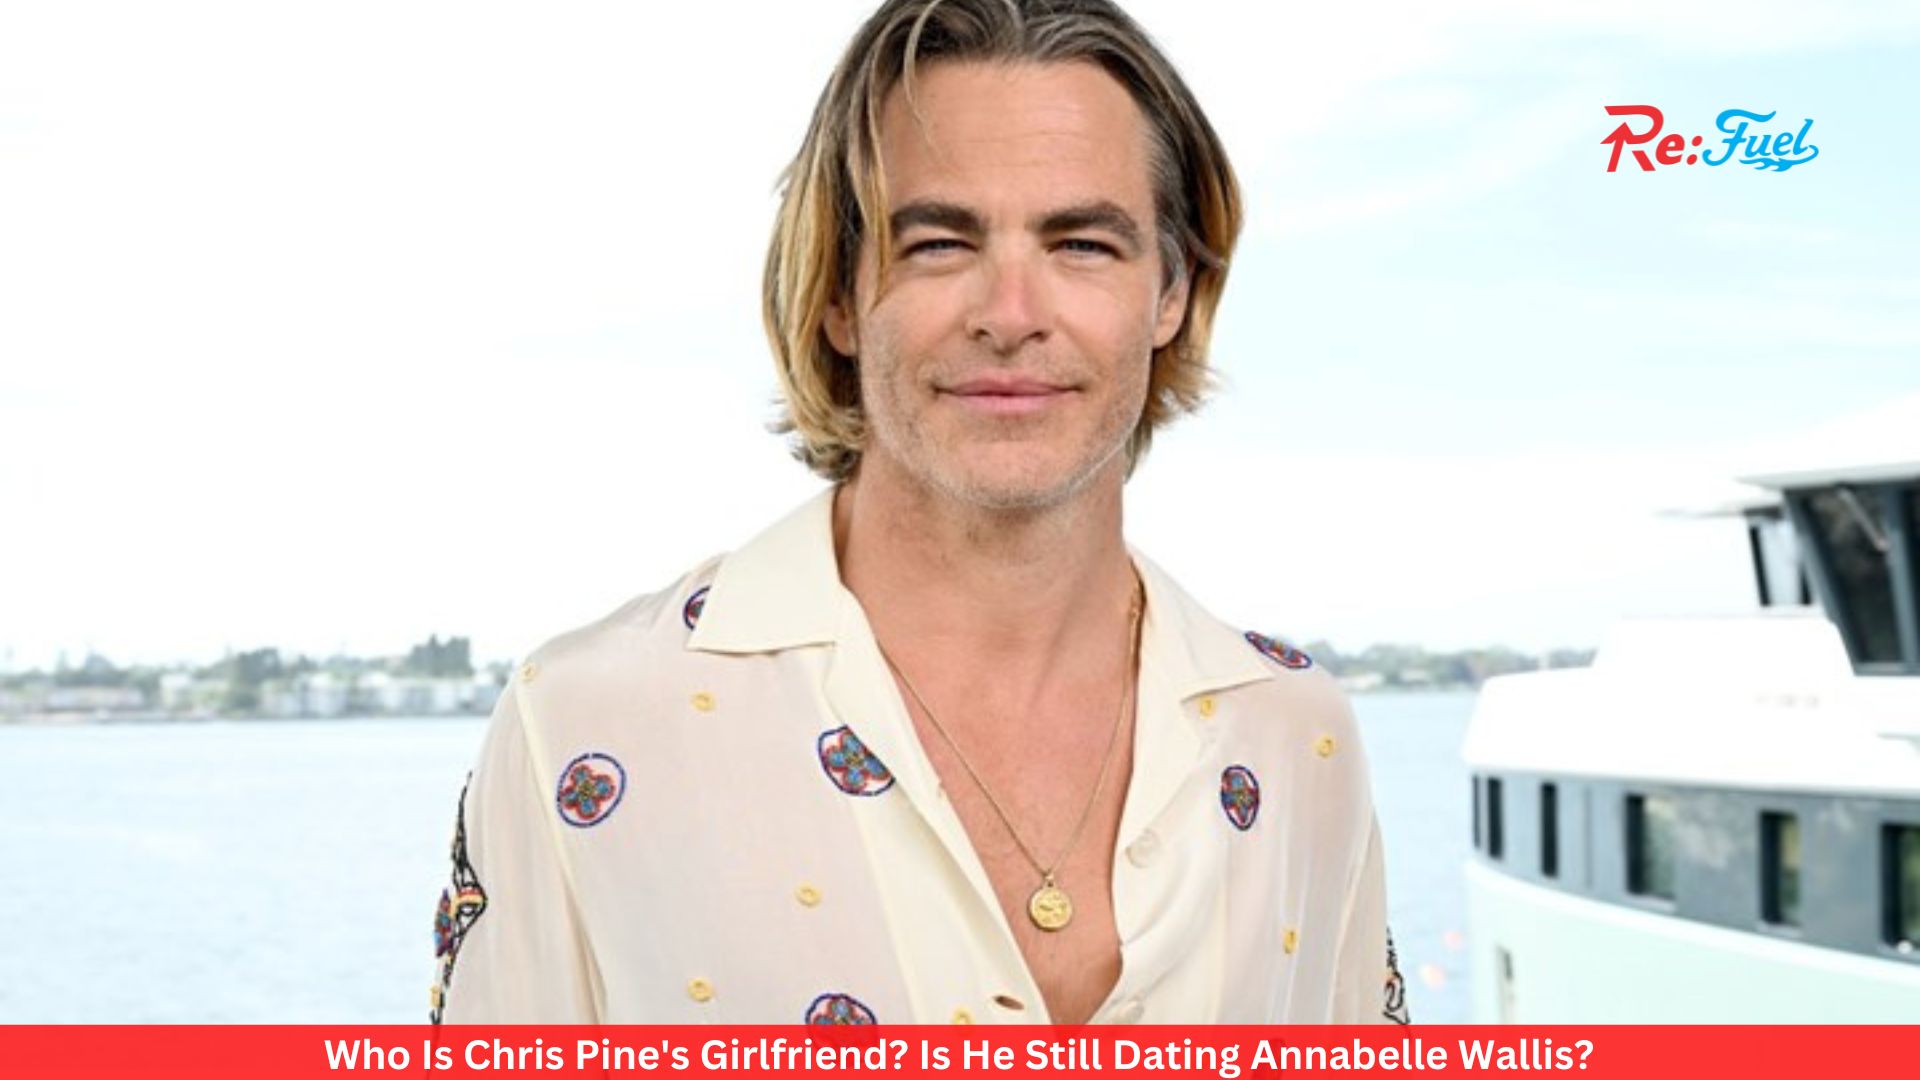 Who Is Chris Pine's Girlfriend? Is He Still Dating Annabelle Wallis?